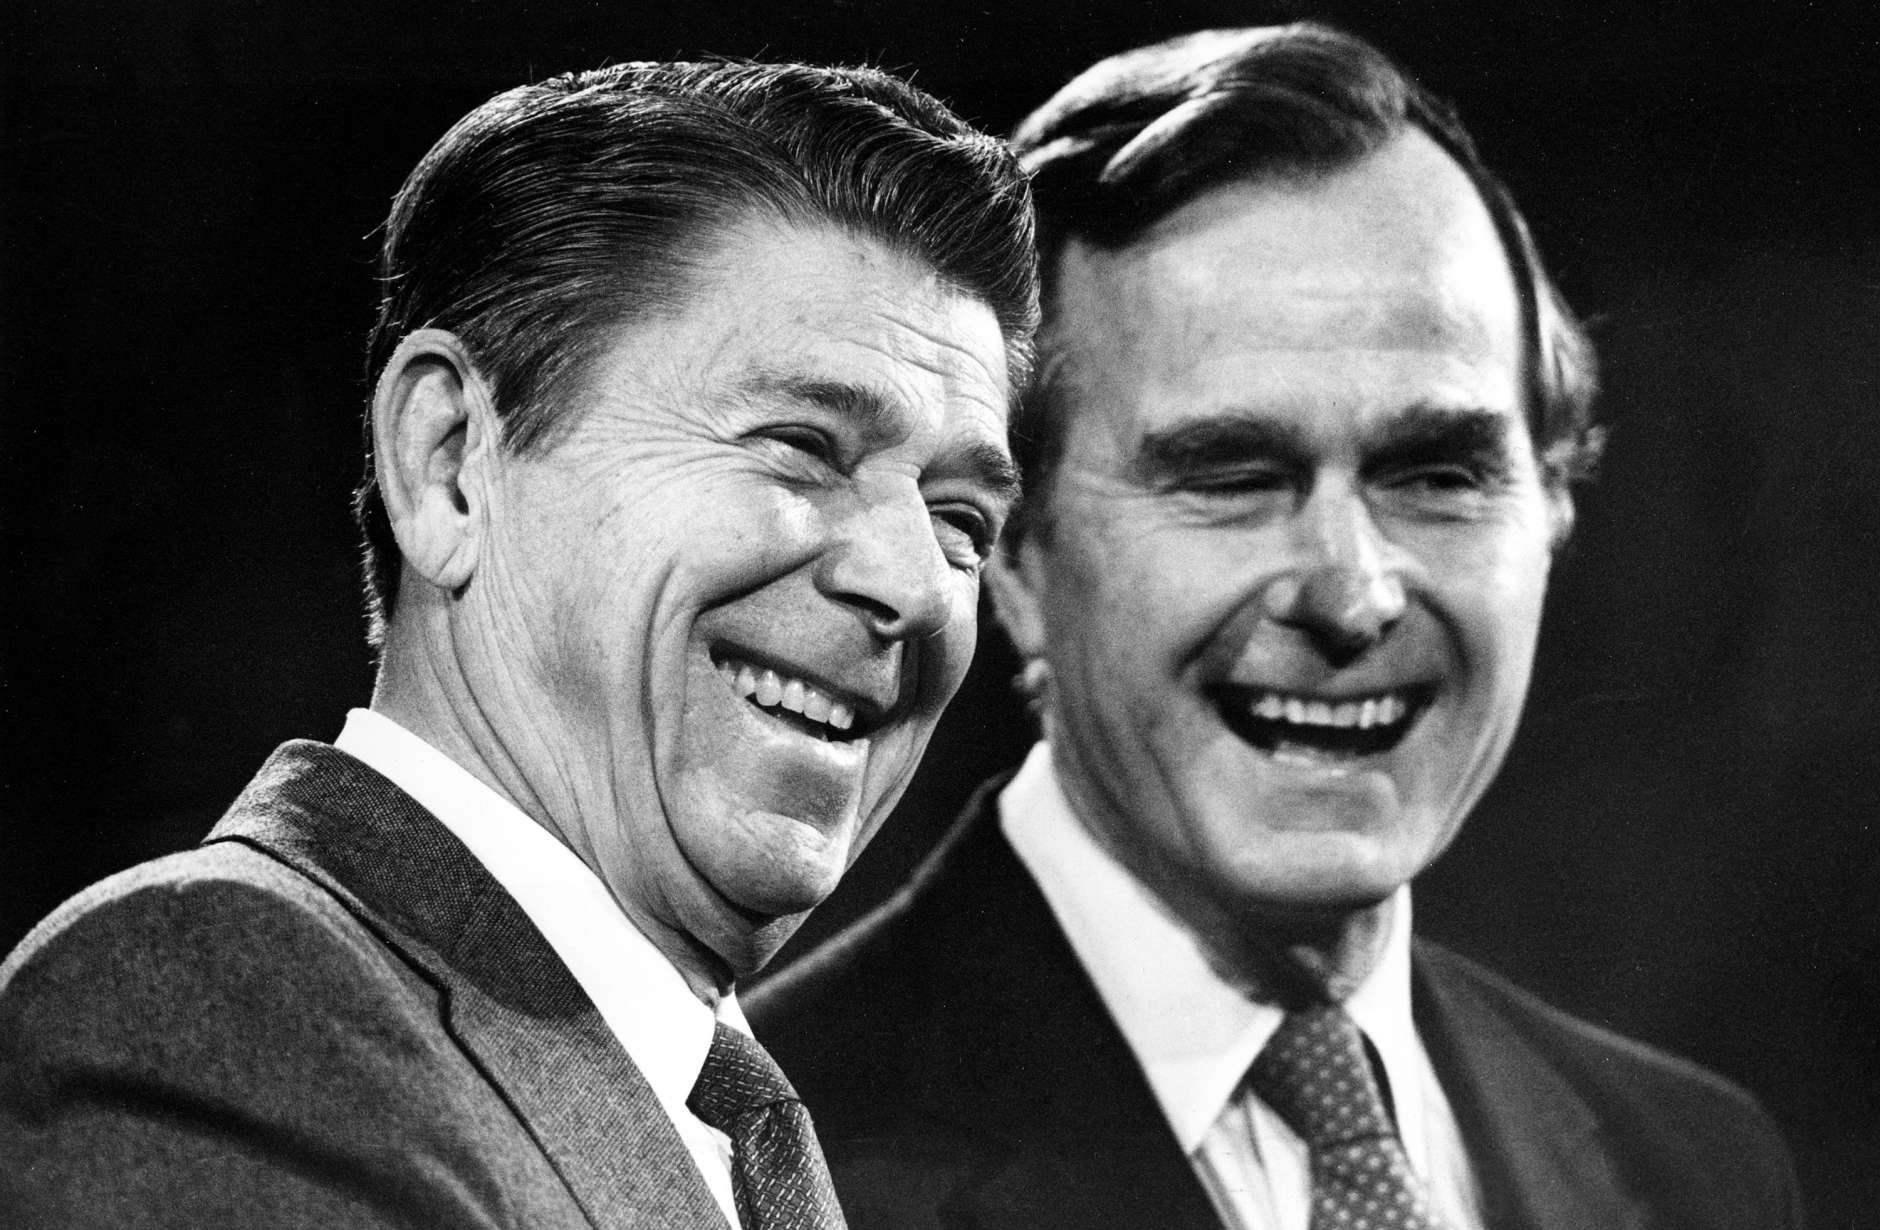 U.S. President-elect Ronald Reagan, left, and Vice President-elect George Bush share a laugh during their first news conference in which they announced their transitional team in Los Angeles, Ca., Nov. 6, 1980.  (AP Photo)